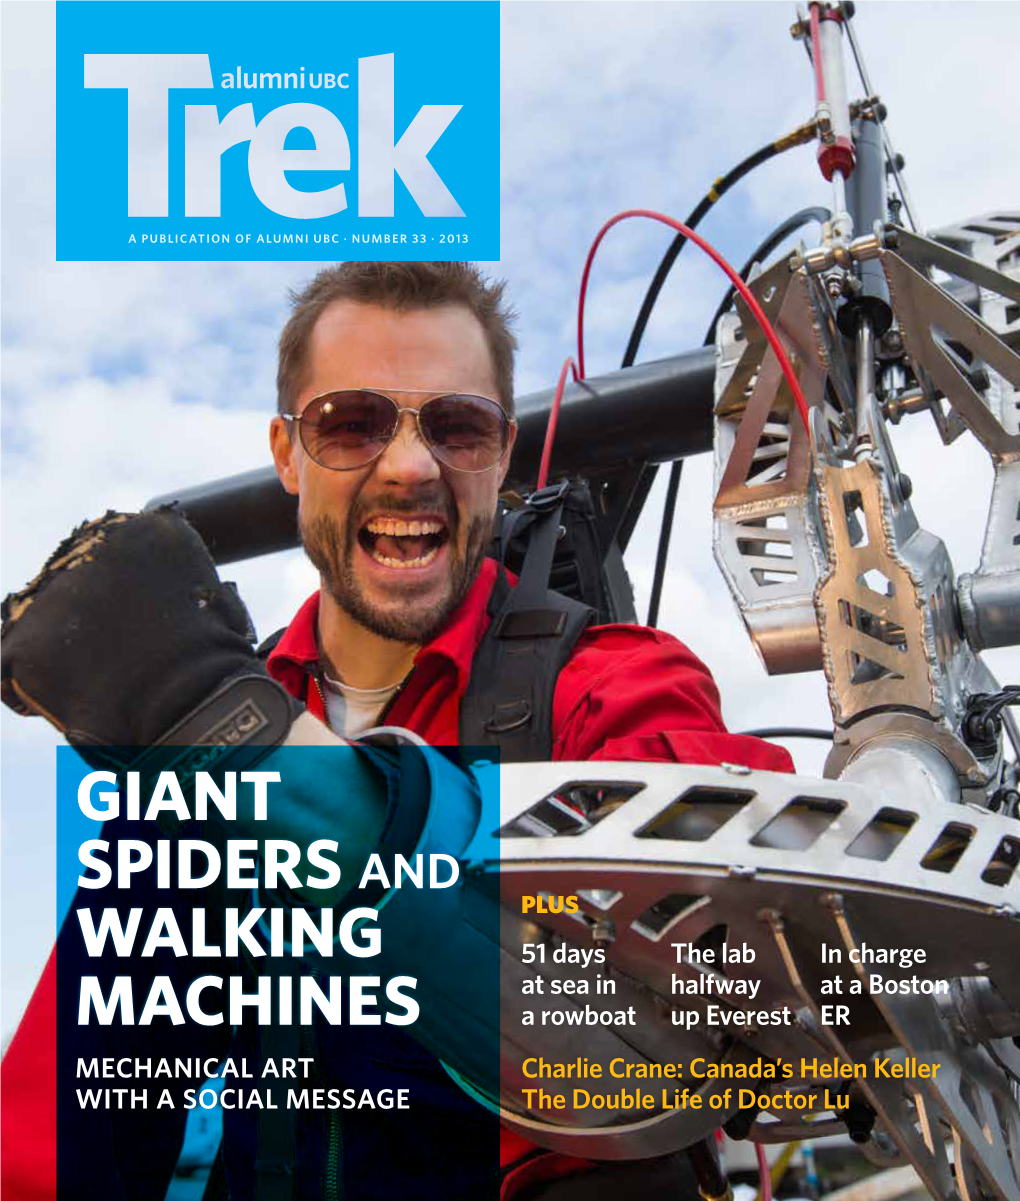 Giant Spiders and Walking Machines